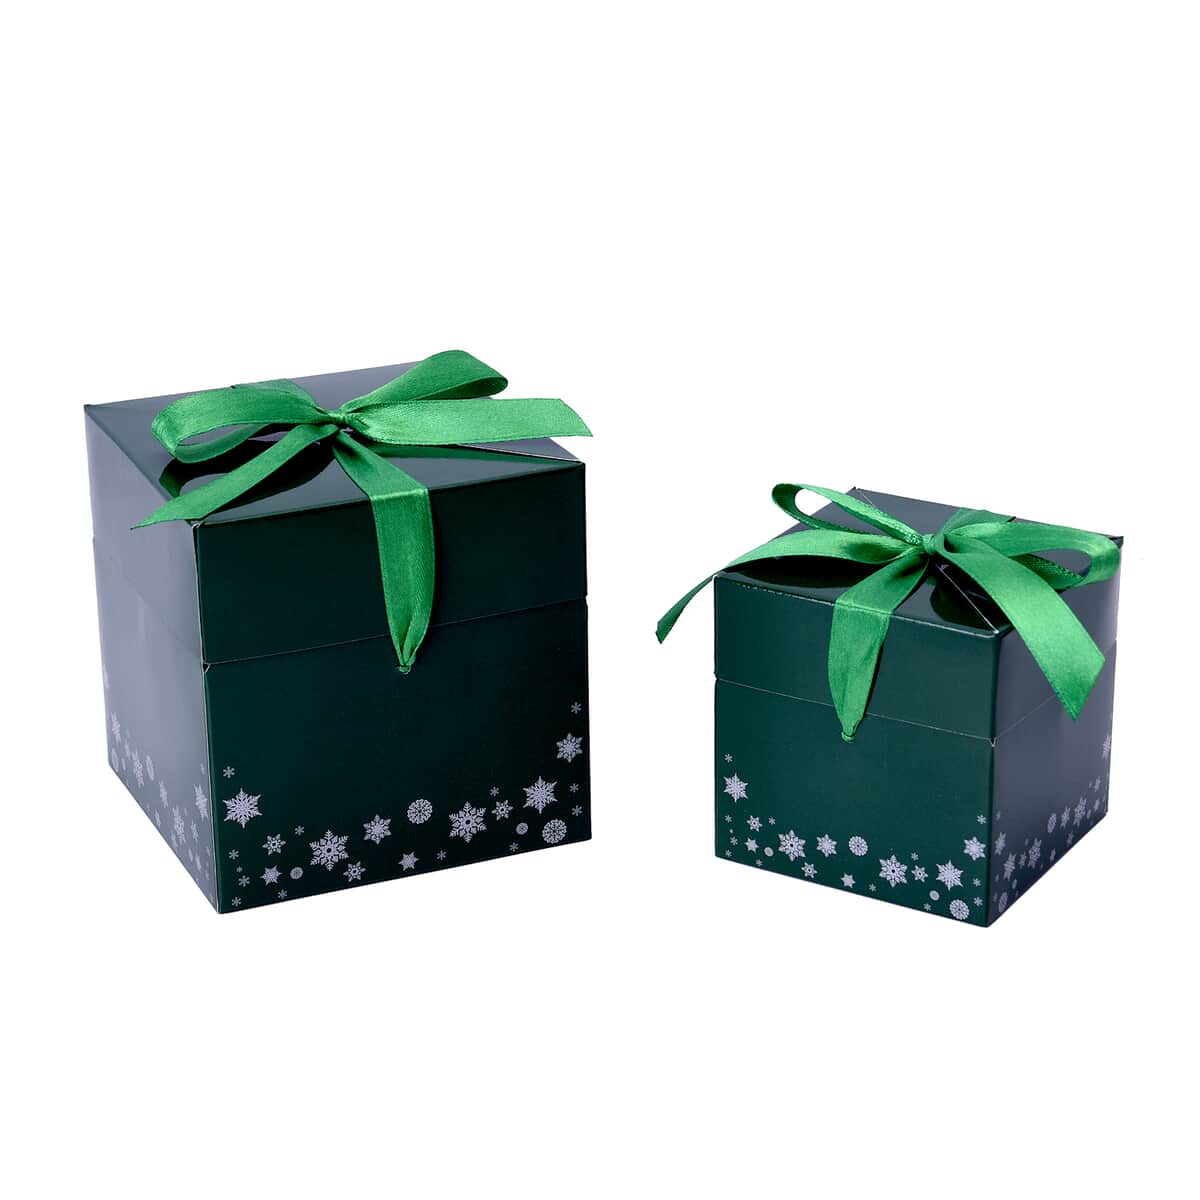 Set of 10pcs Green Paper, Ribbon Bow Snowflakes and Christmas Tree Pattern Gift Box (4x4, 3x3) with Christmas Tree Card and Stocking Card image number 6